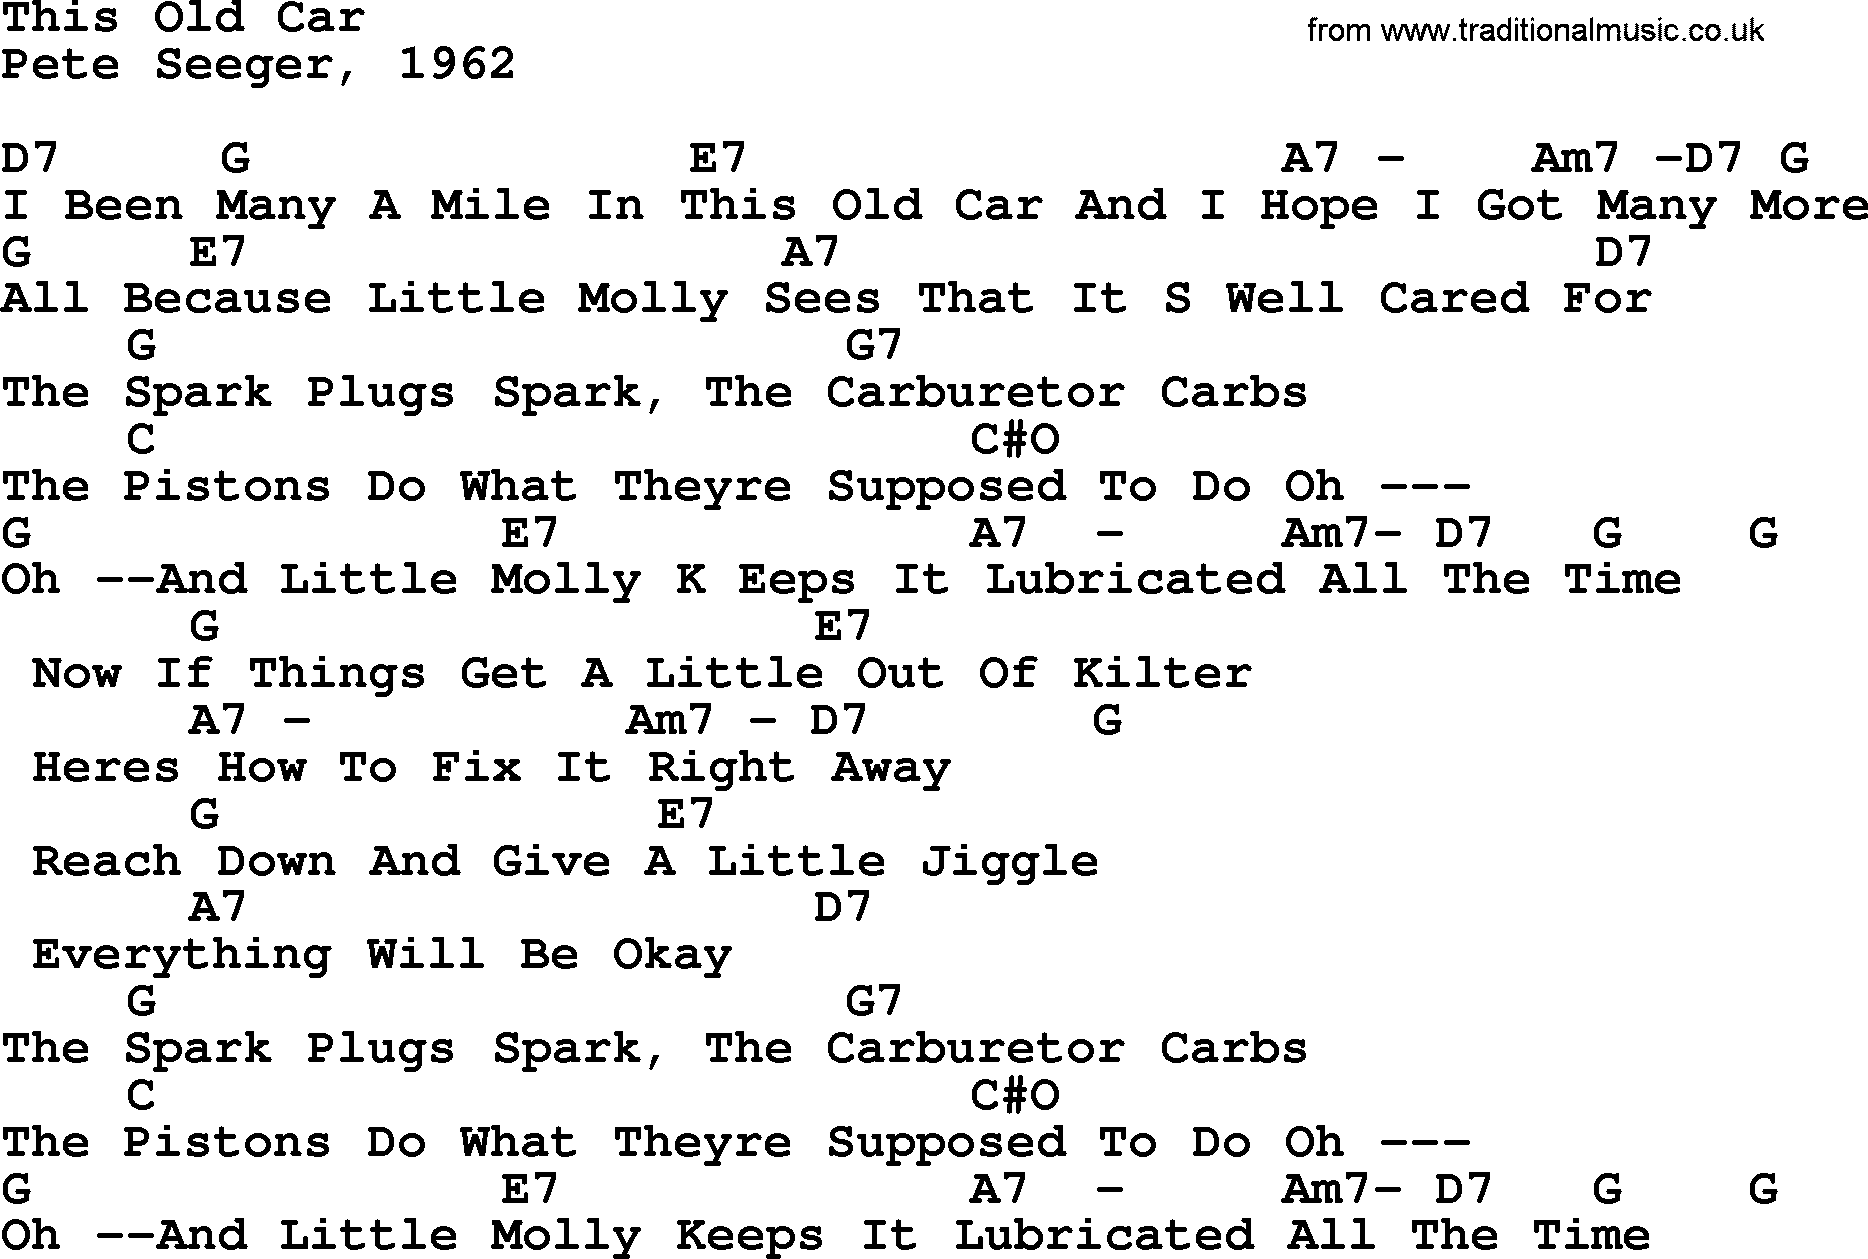 Pete Seeger song This Old Car, lyrics and chords